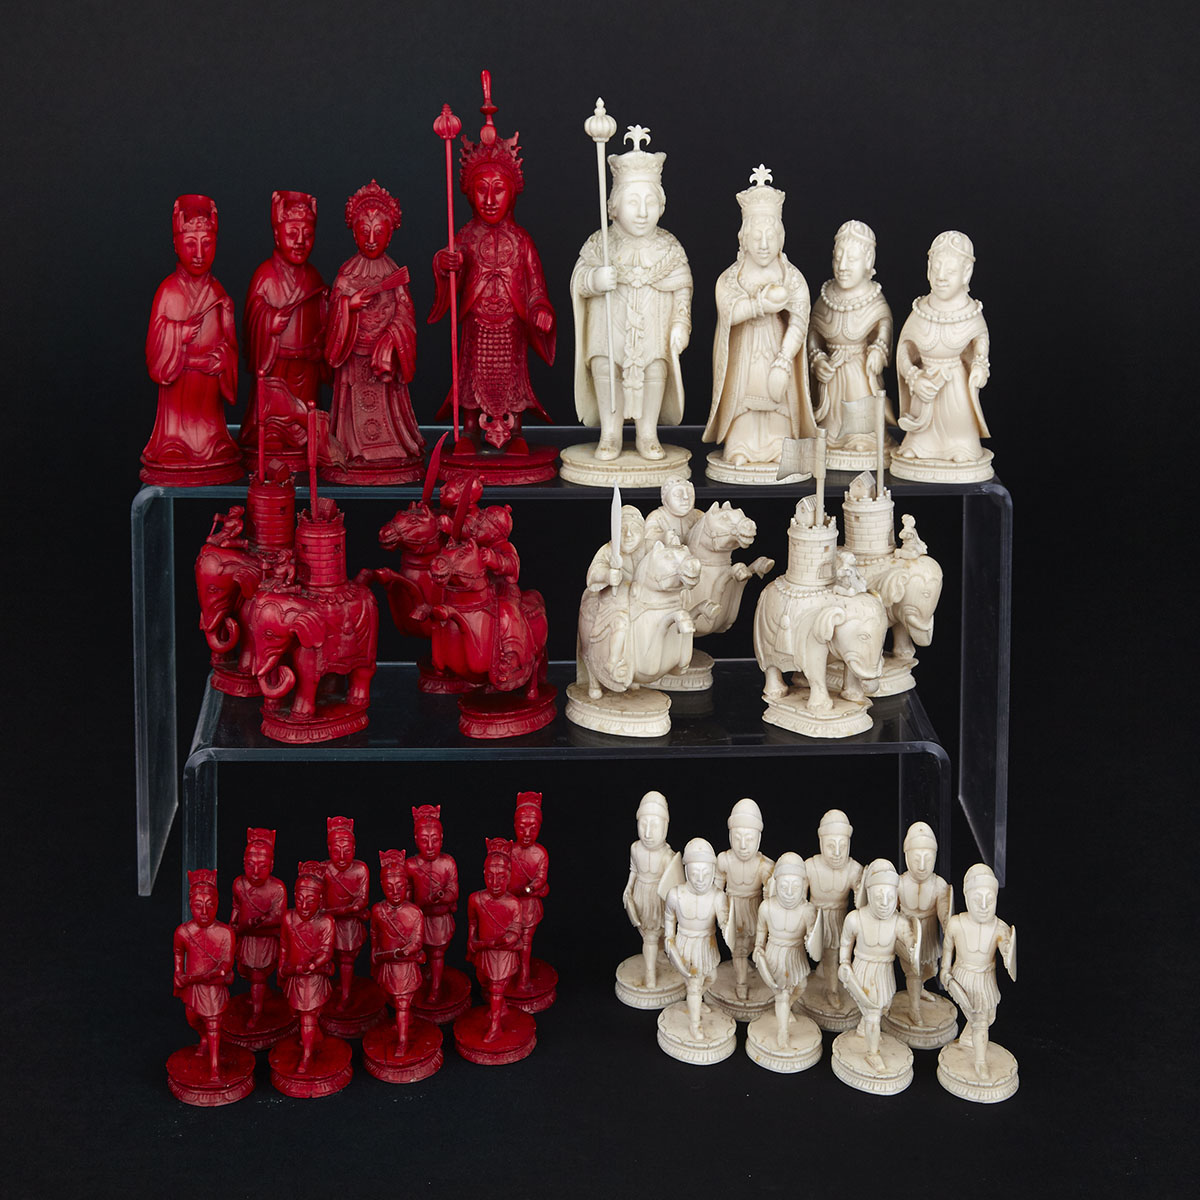 Chinese Export Carved Ivory ‘King George’ Figural Chess Set, Canton, early 19th century